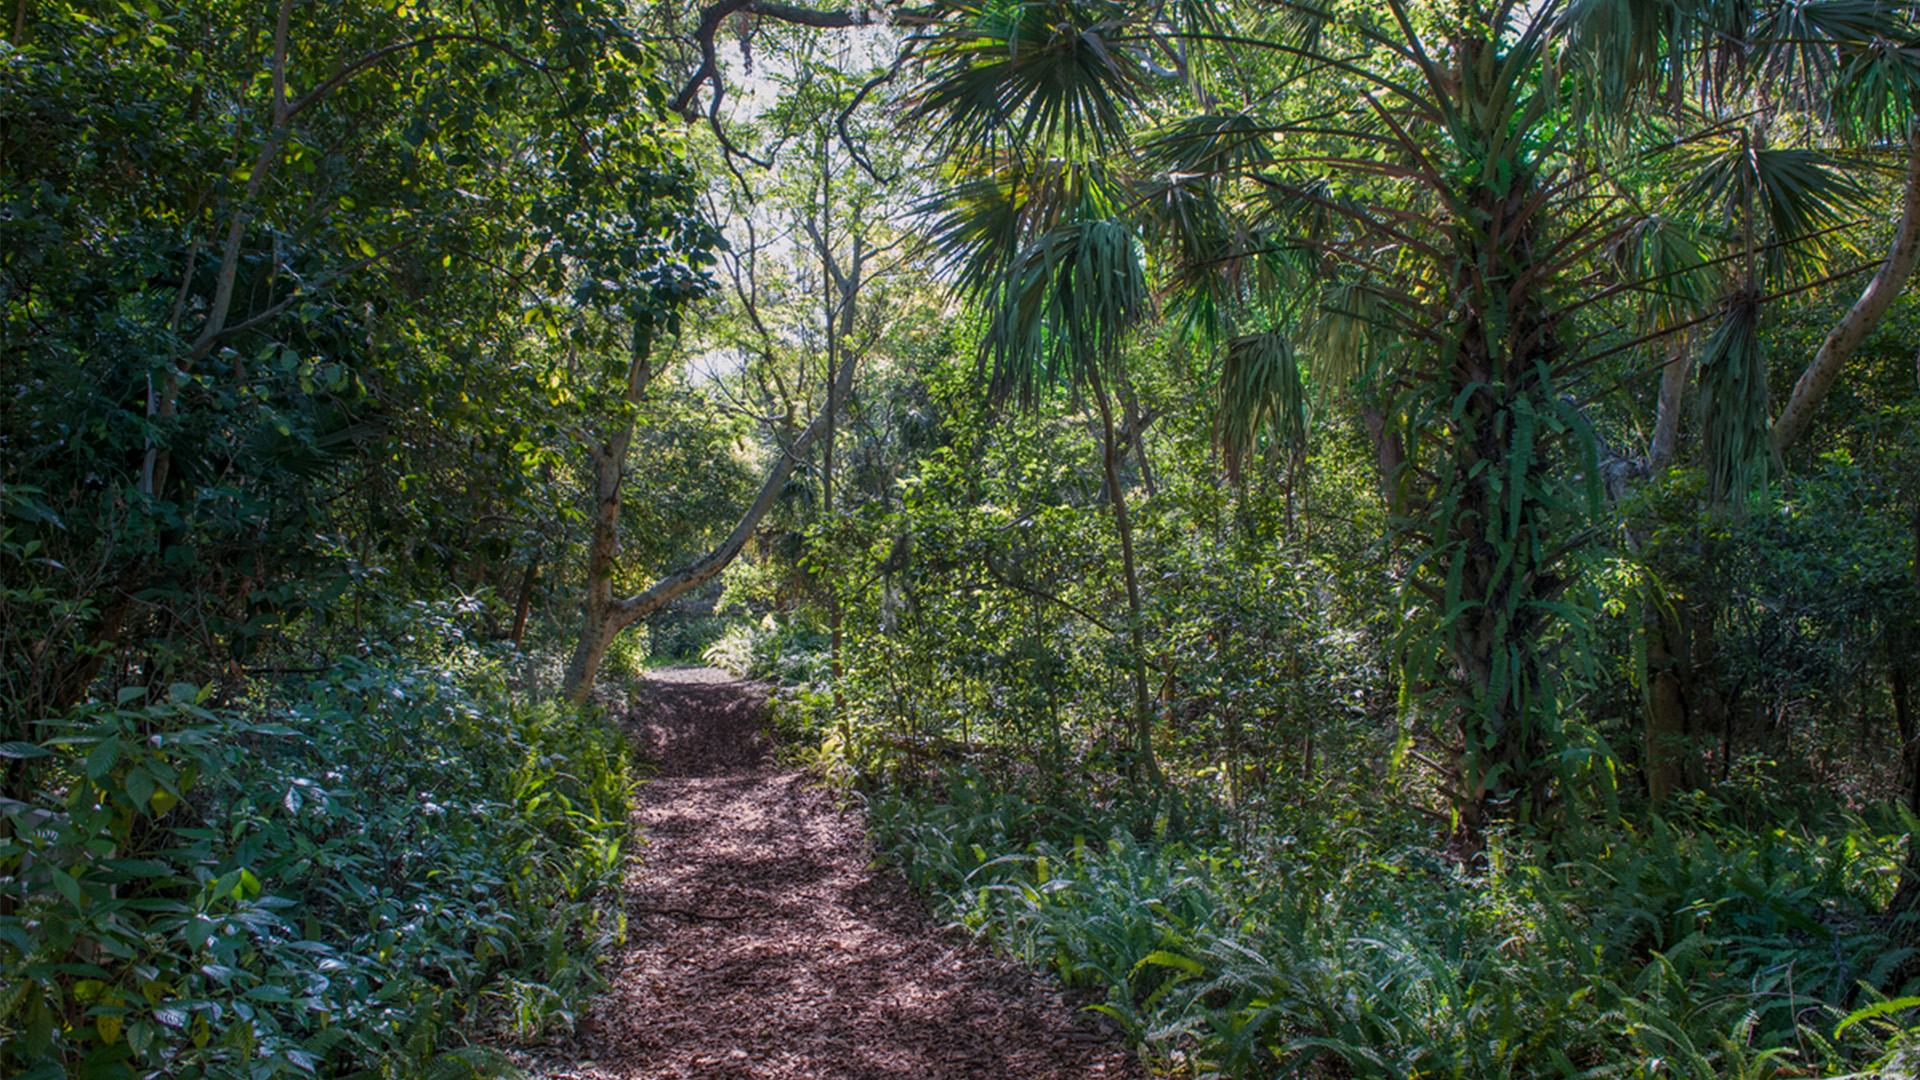 View of a hiking trail surrounded by green trees and wild shrubbery. A mulched patch is seen in the center with some sky peeking out behind the trees. Image courtesy of GMCVB/miamiandbeaches.com